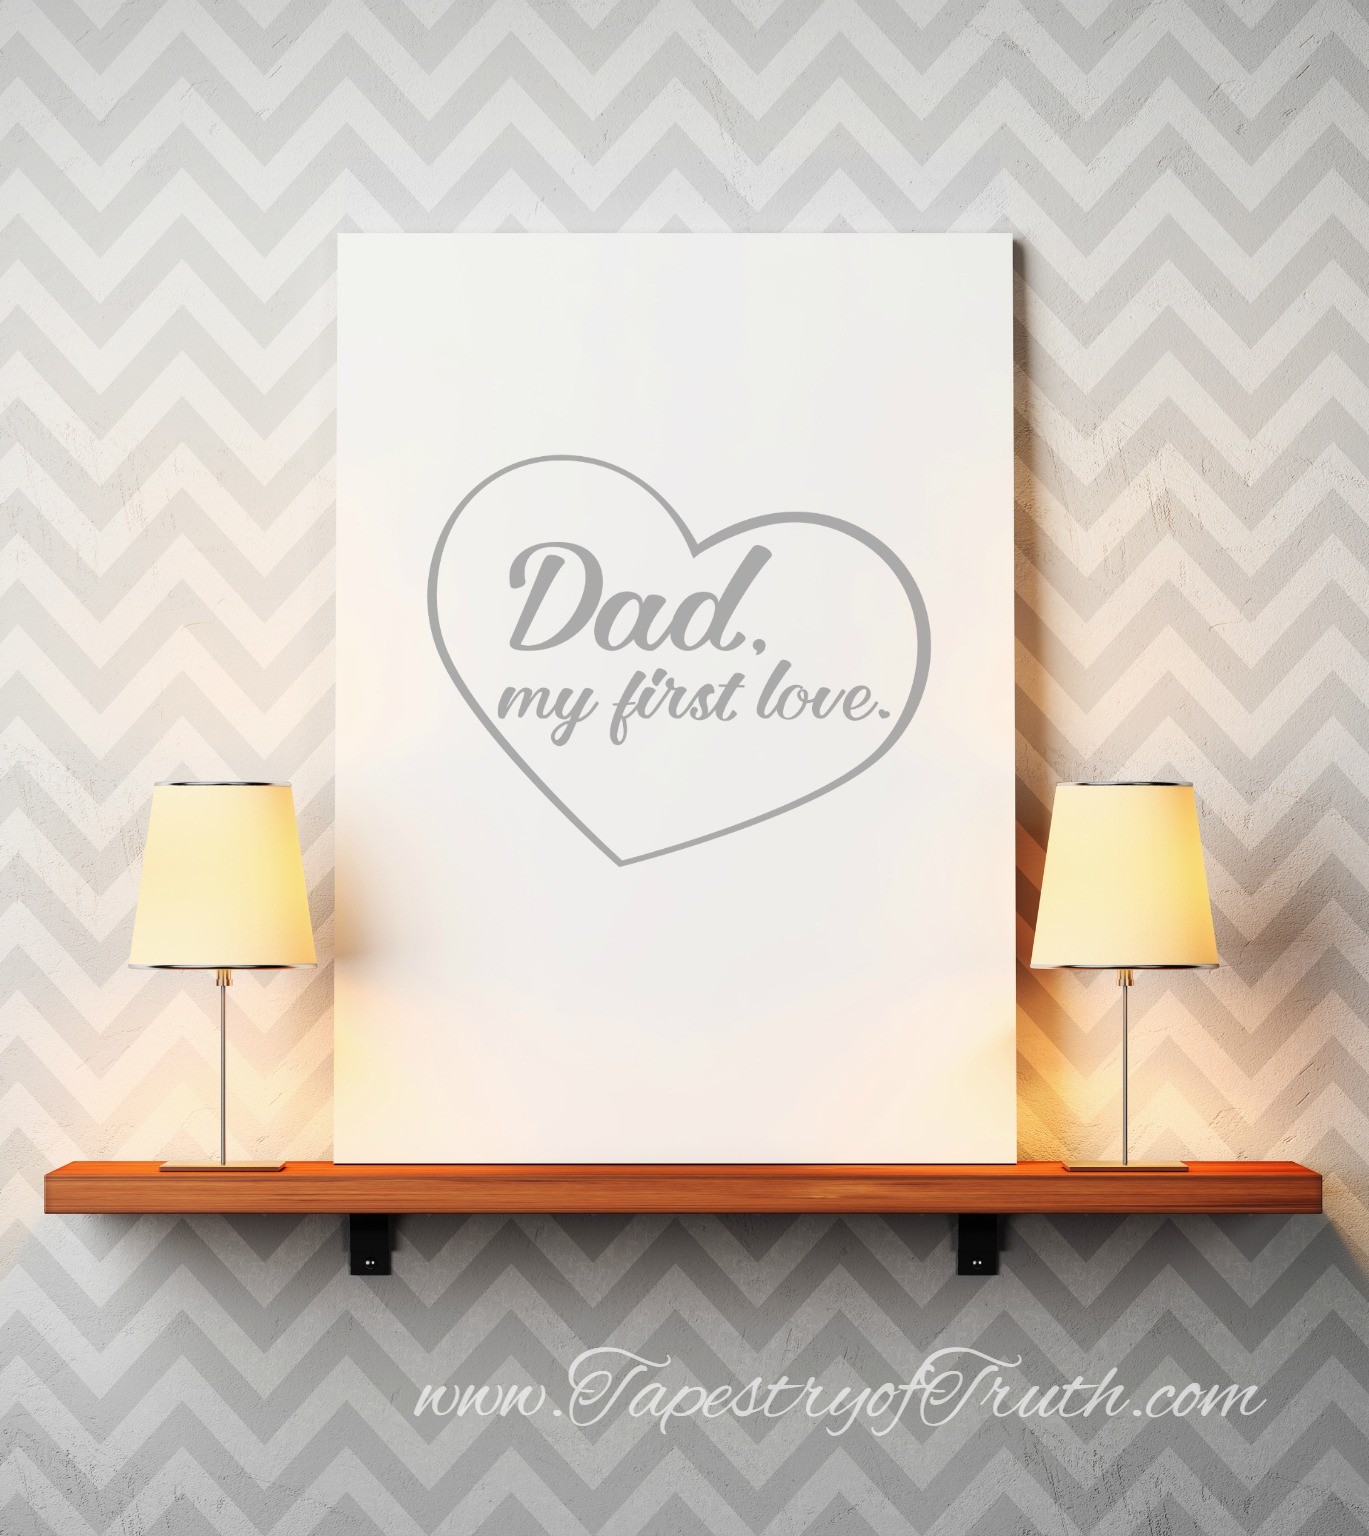 Dad, my first love [heart] - Decal 2